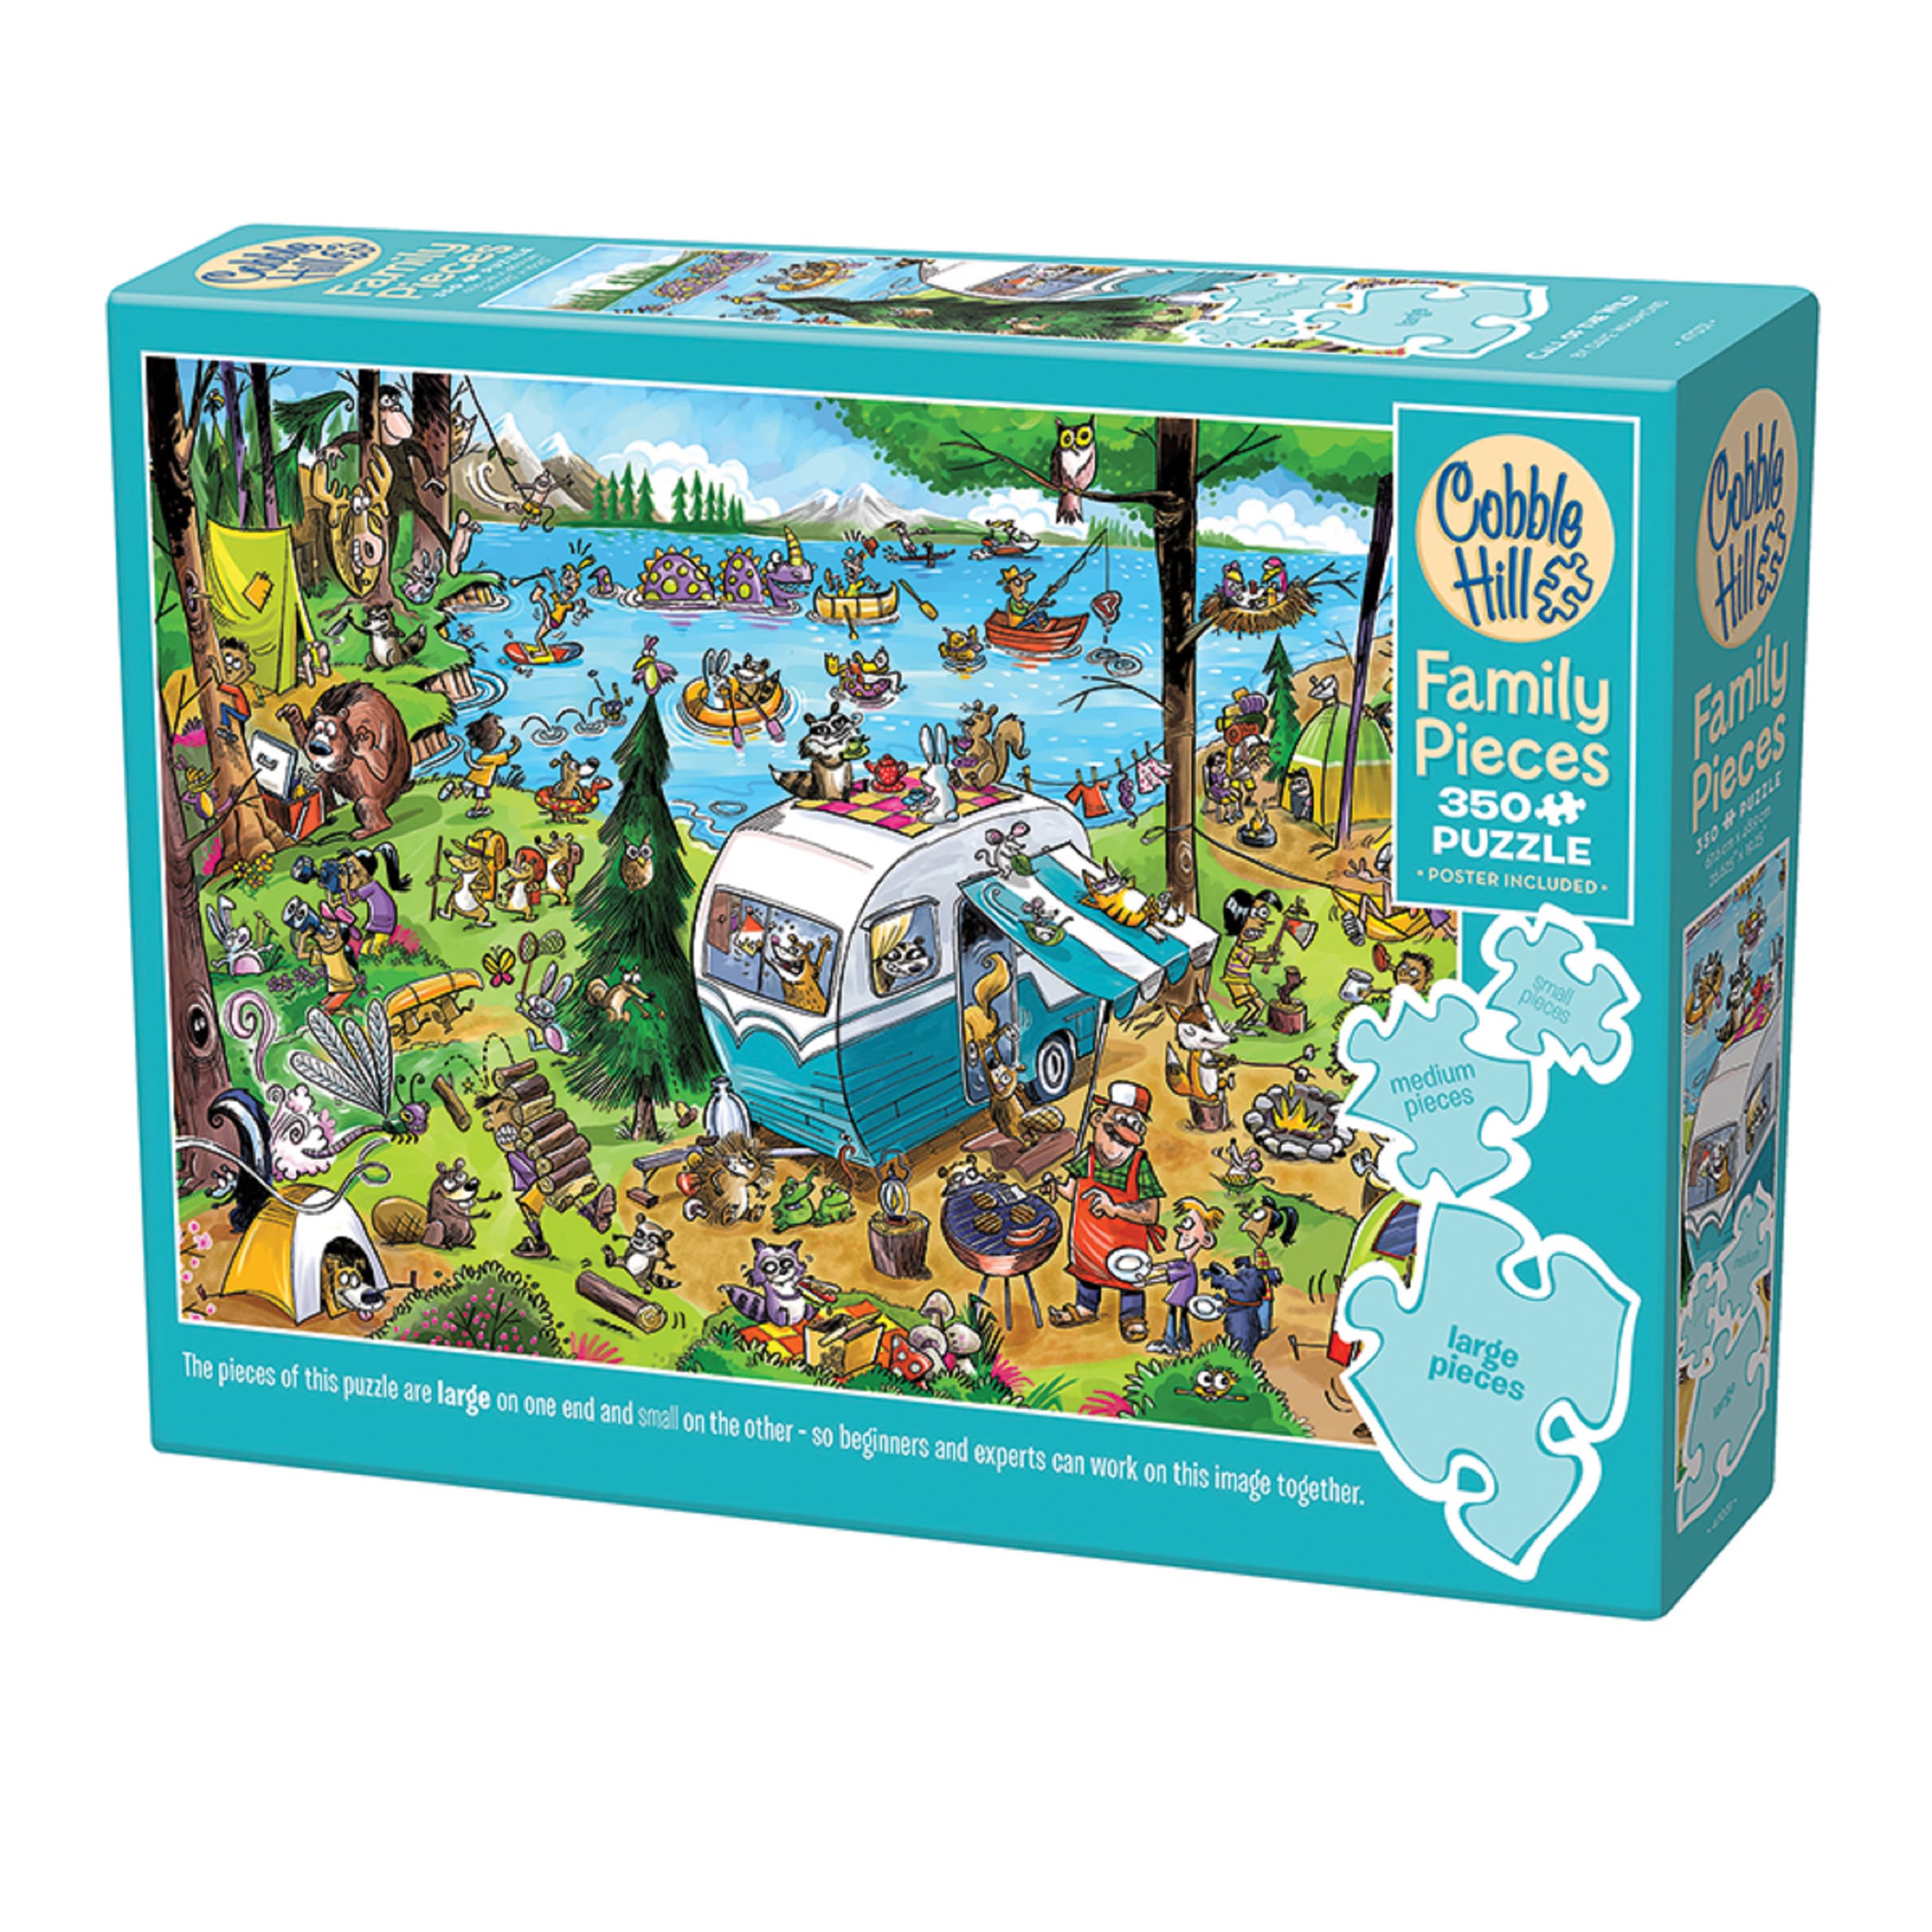 Cobble Hill Call of the Wild Puzzle - 350 Pieces